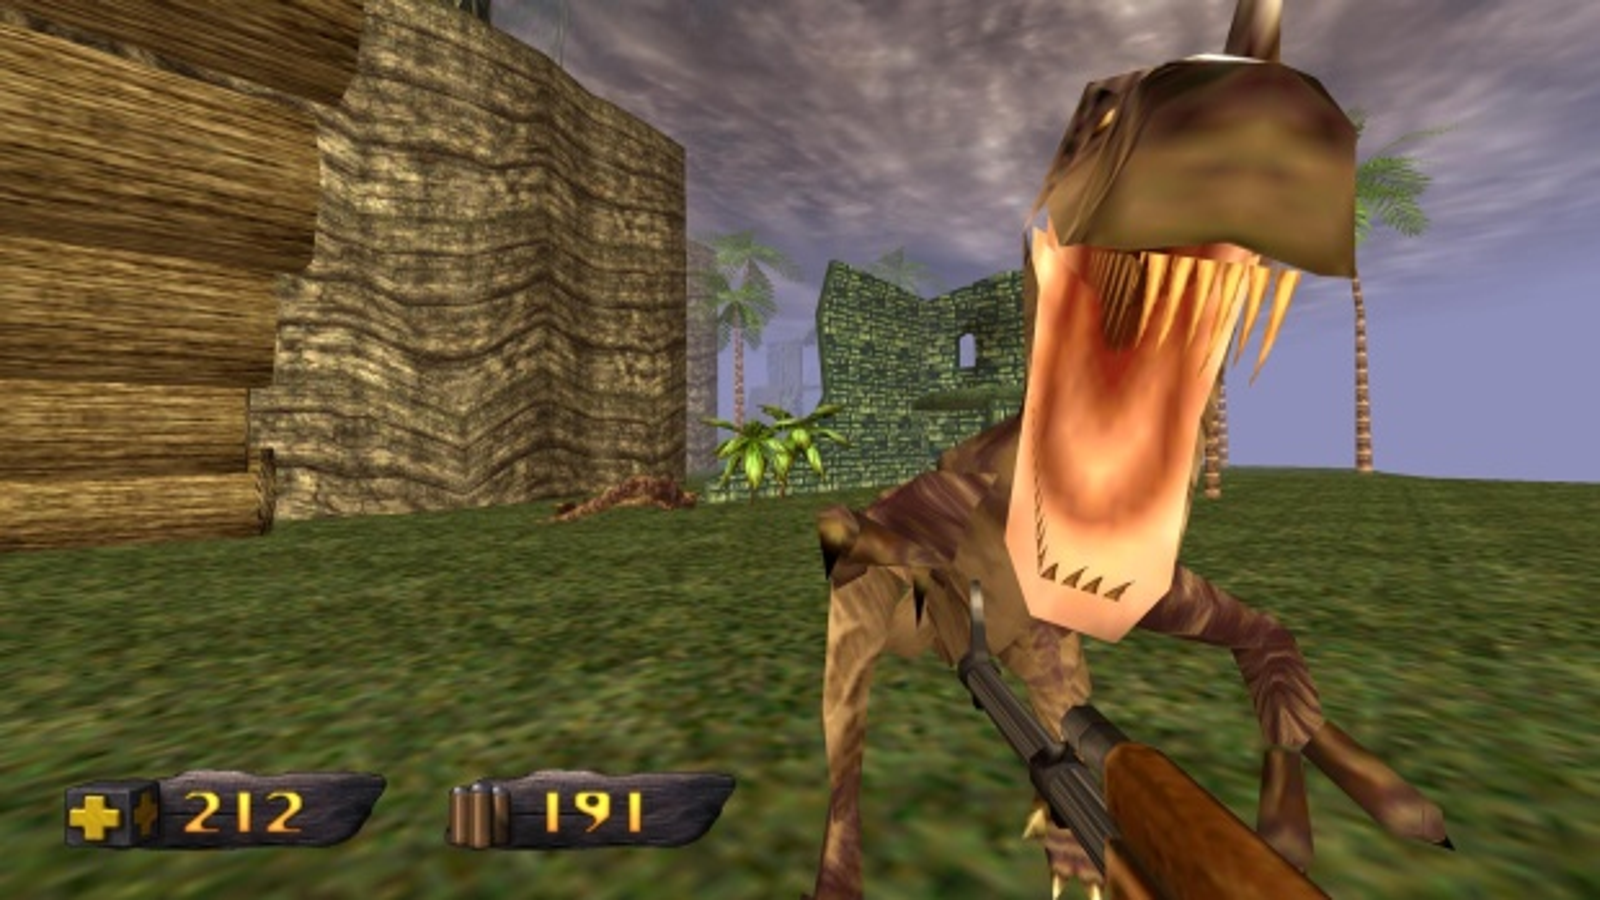 I Just Played Turok: Dinosaur Hunter For The First Time | Rock Paper Shotgun